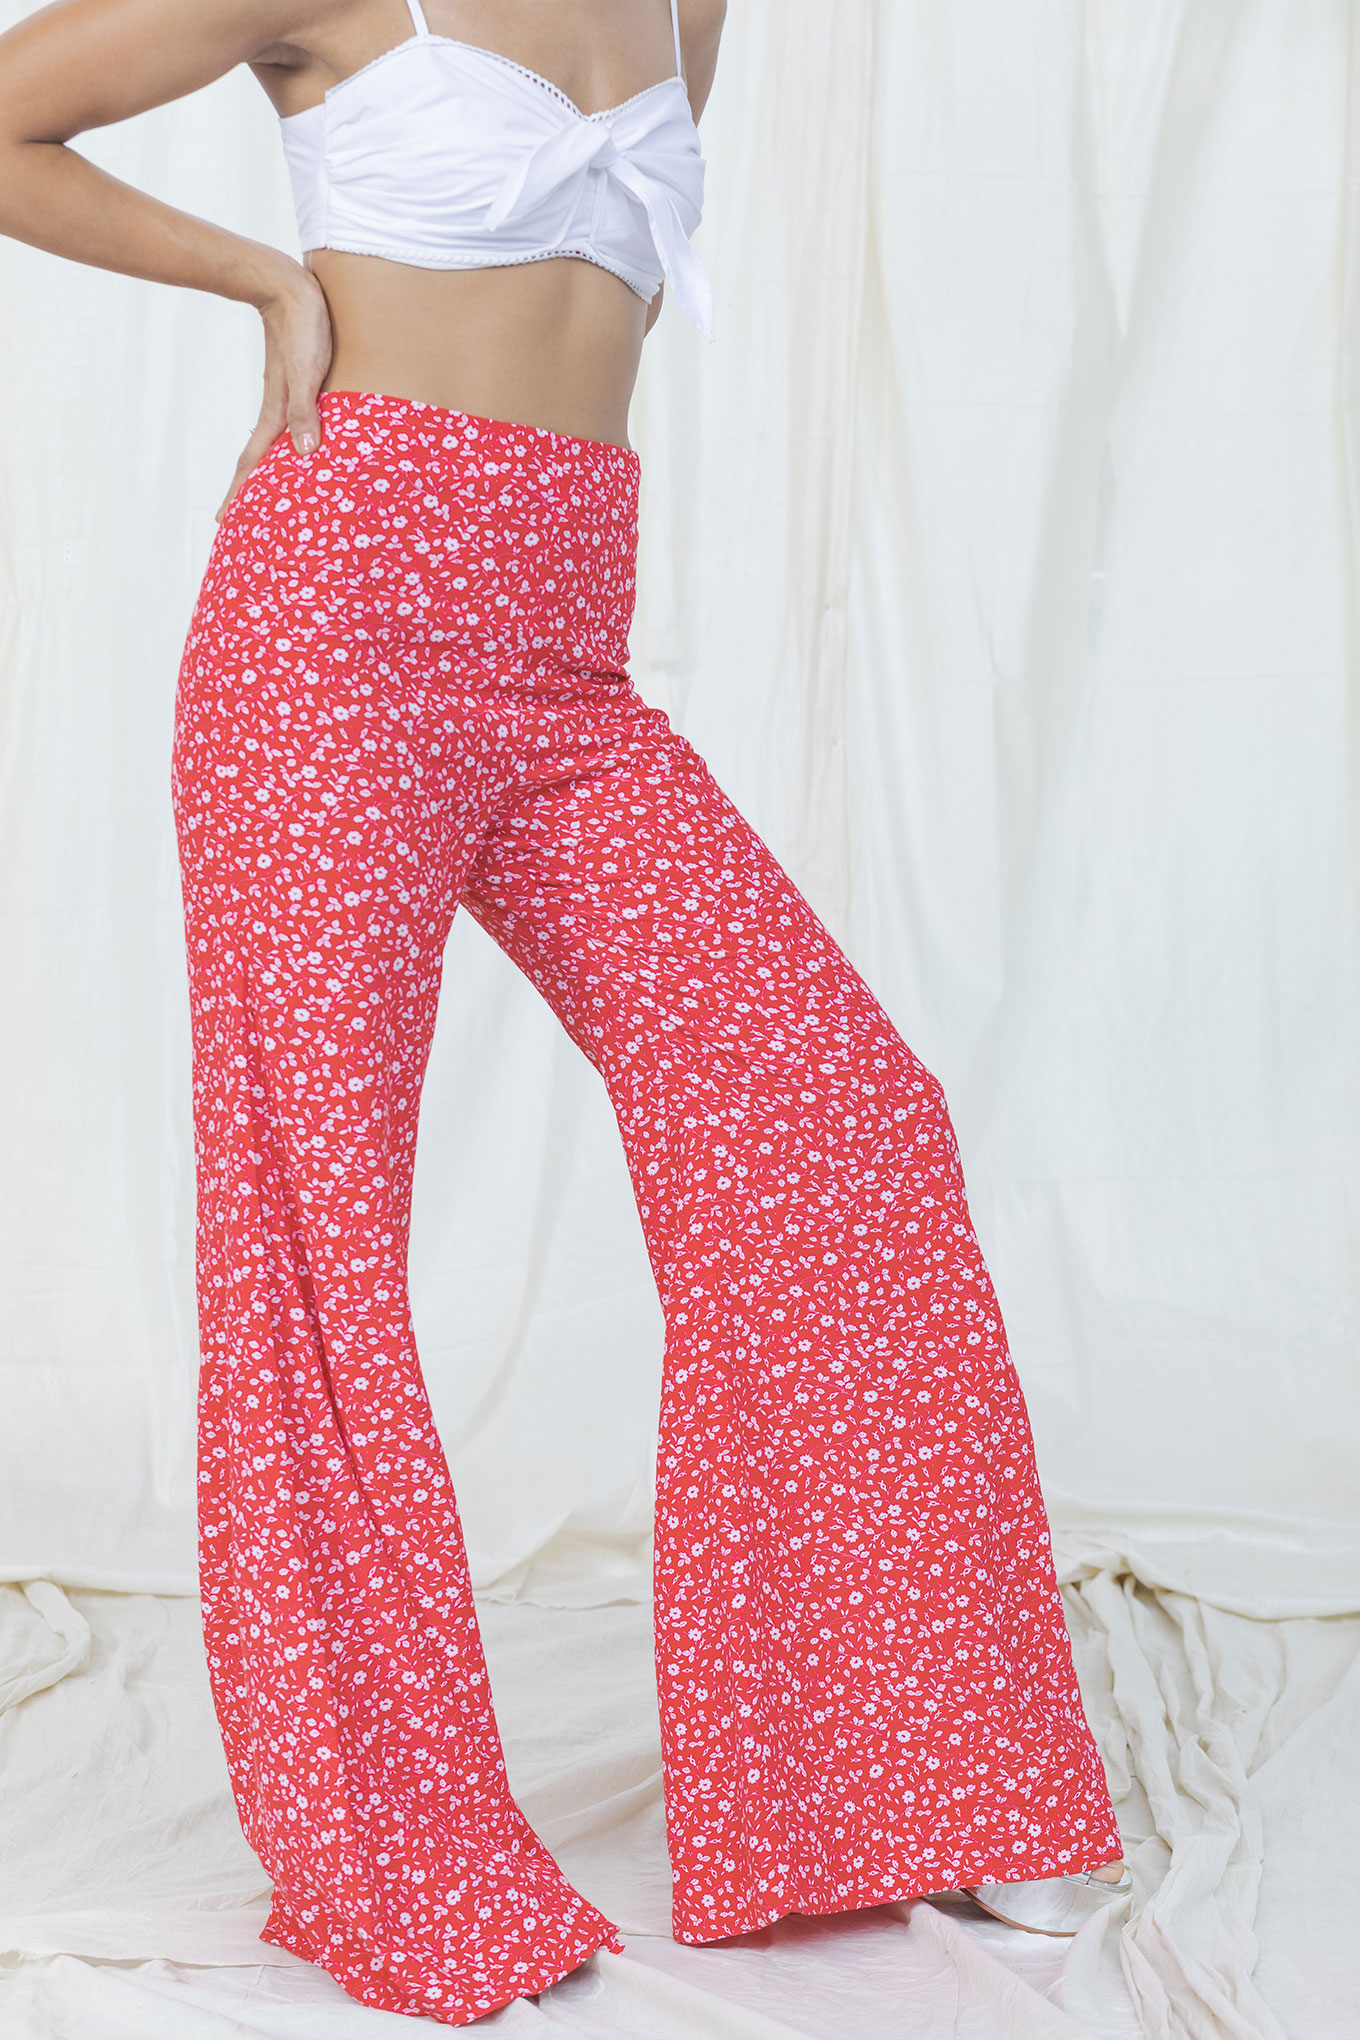 Bell Bottom Pants Pattern: Flaunt a Retro Look With This Pattern-hkpdtq2012.edu.vn